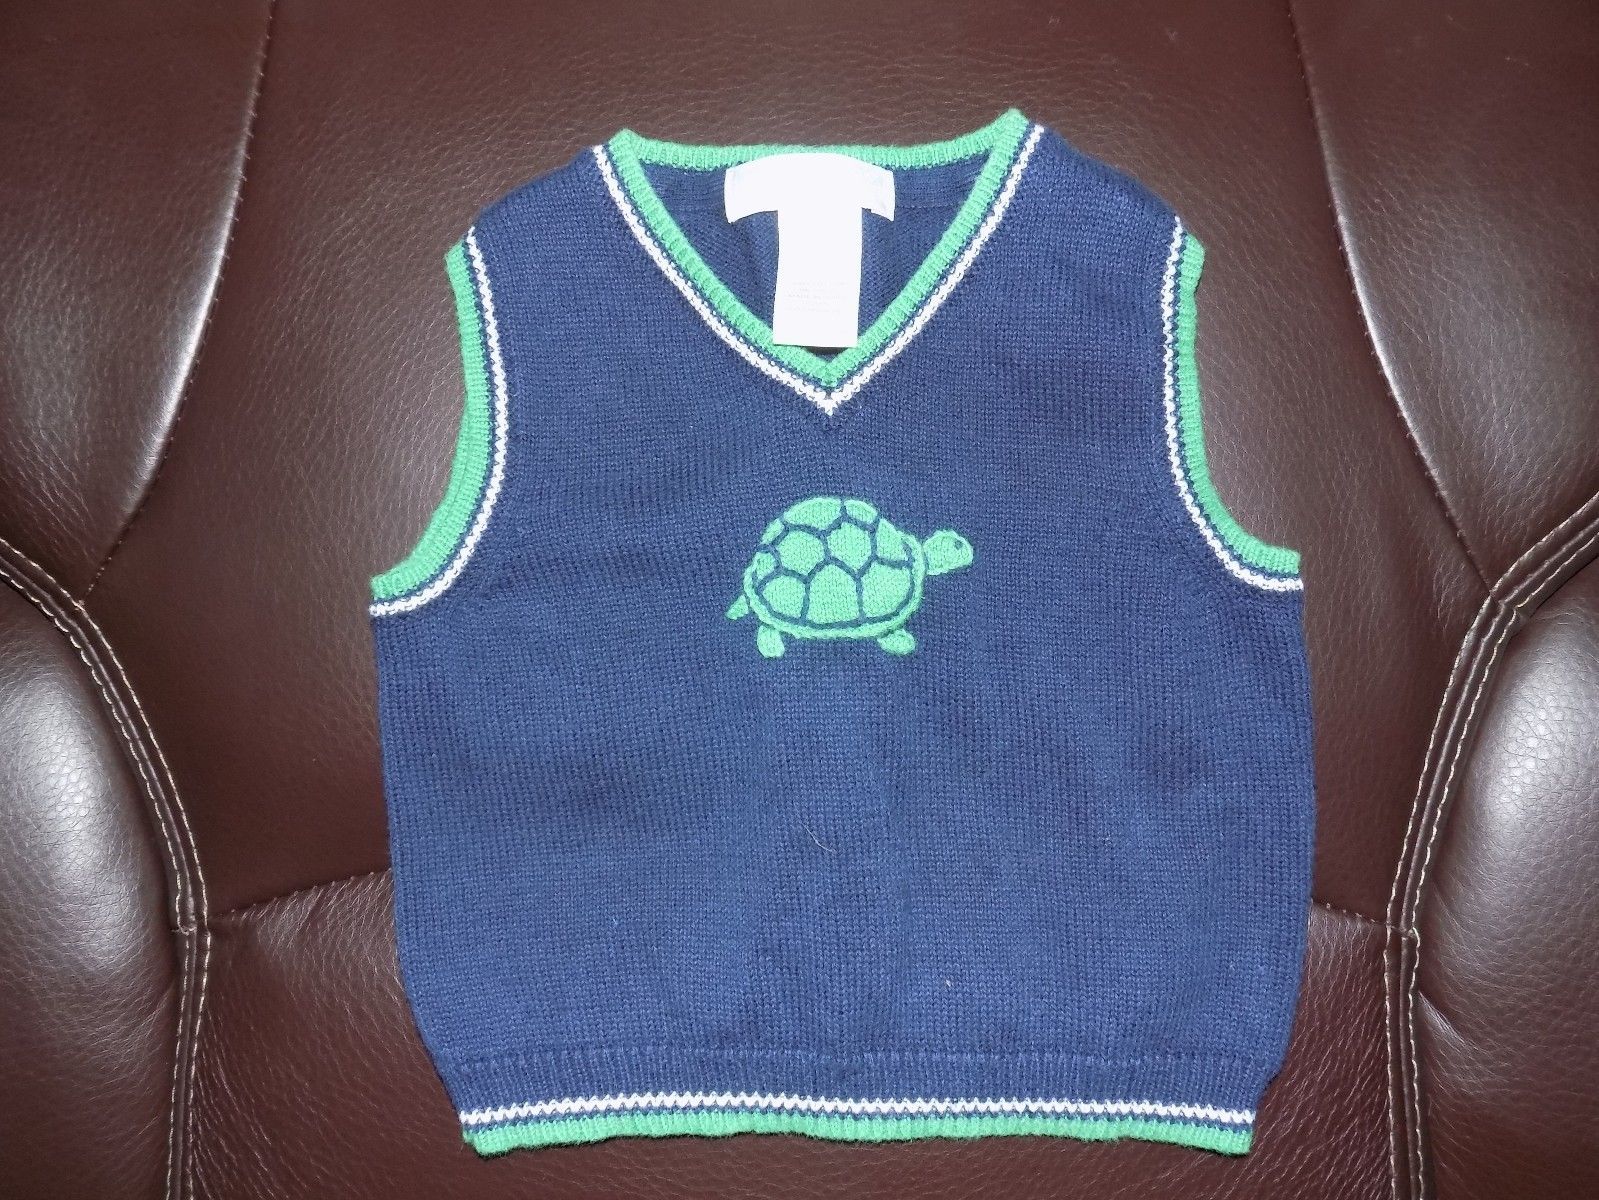 Primary image for Janie and Jack Layette Navy Blue Turtle V-Neck Sweater Vest Size 3/6 Months EUC